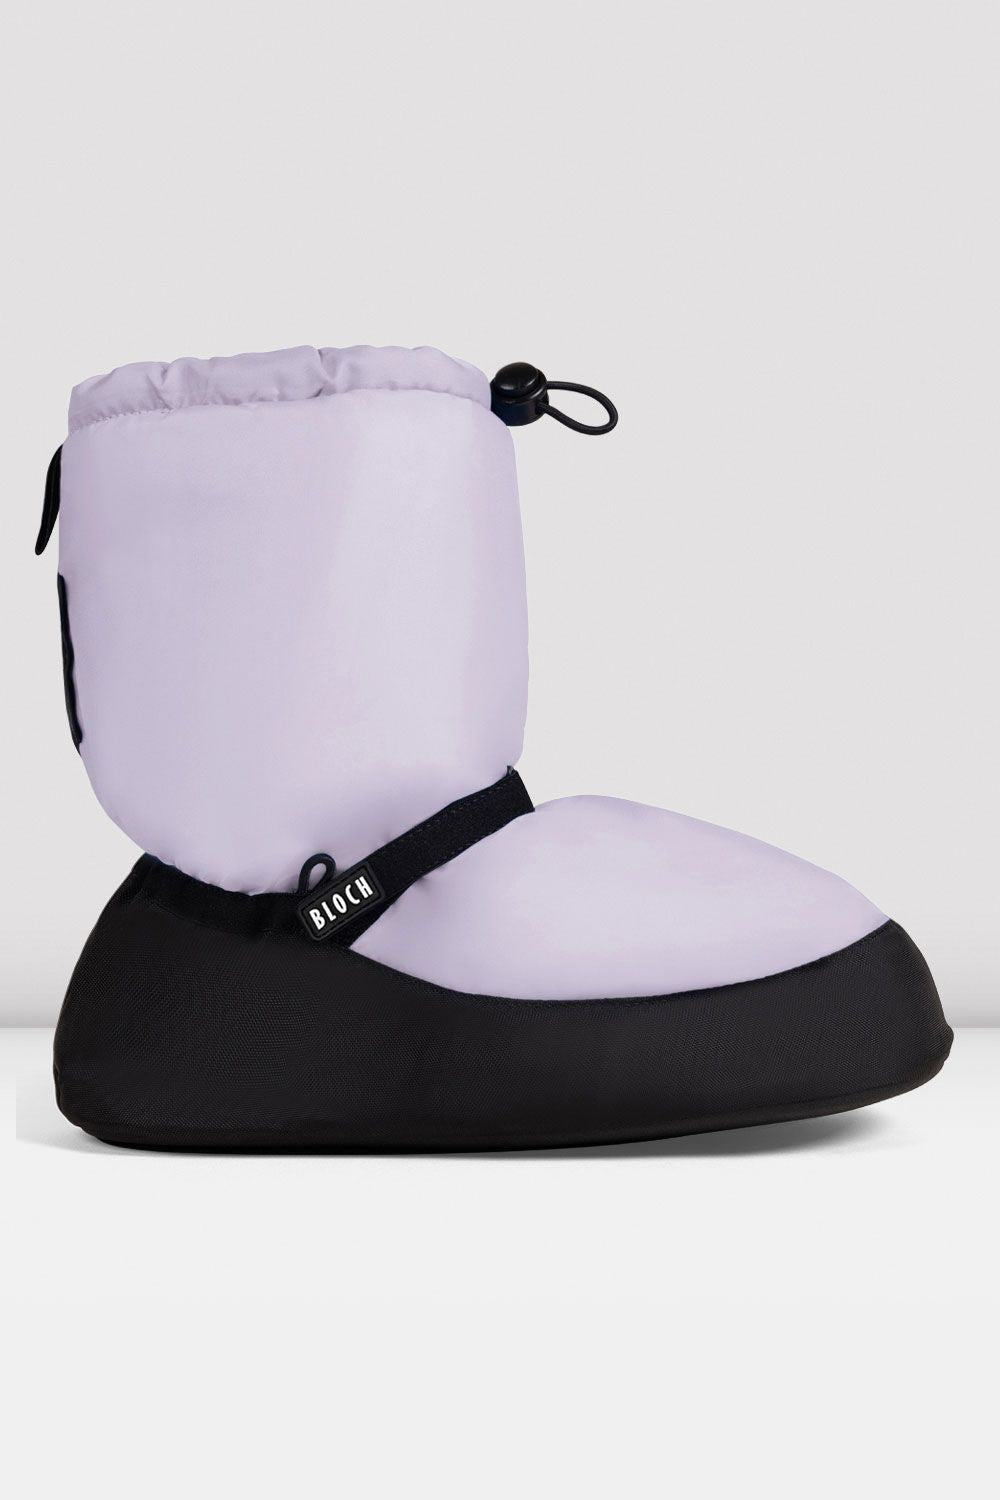 BLOCH Adult Warm Up Booties, Lilac Nylon